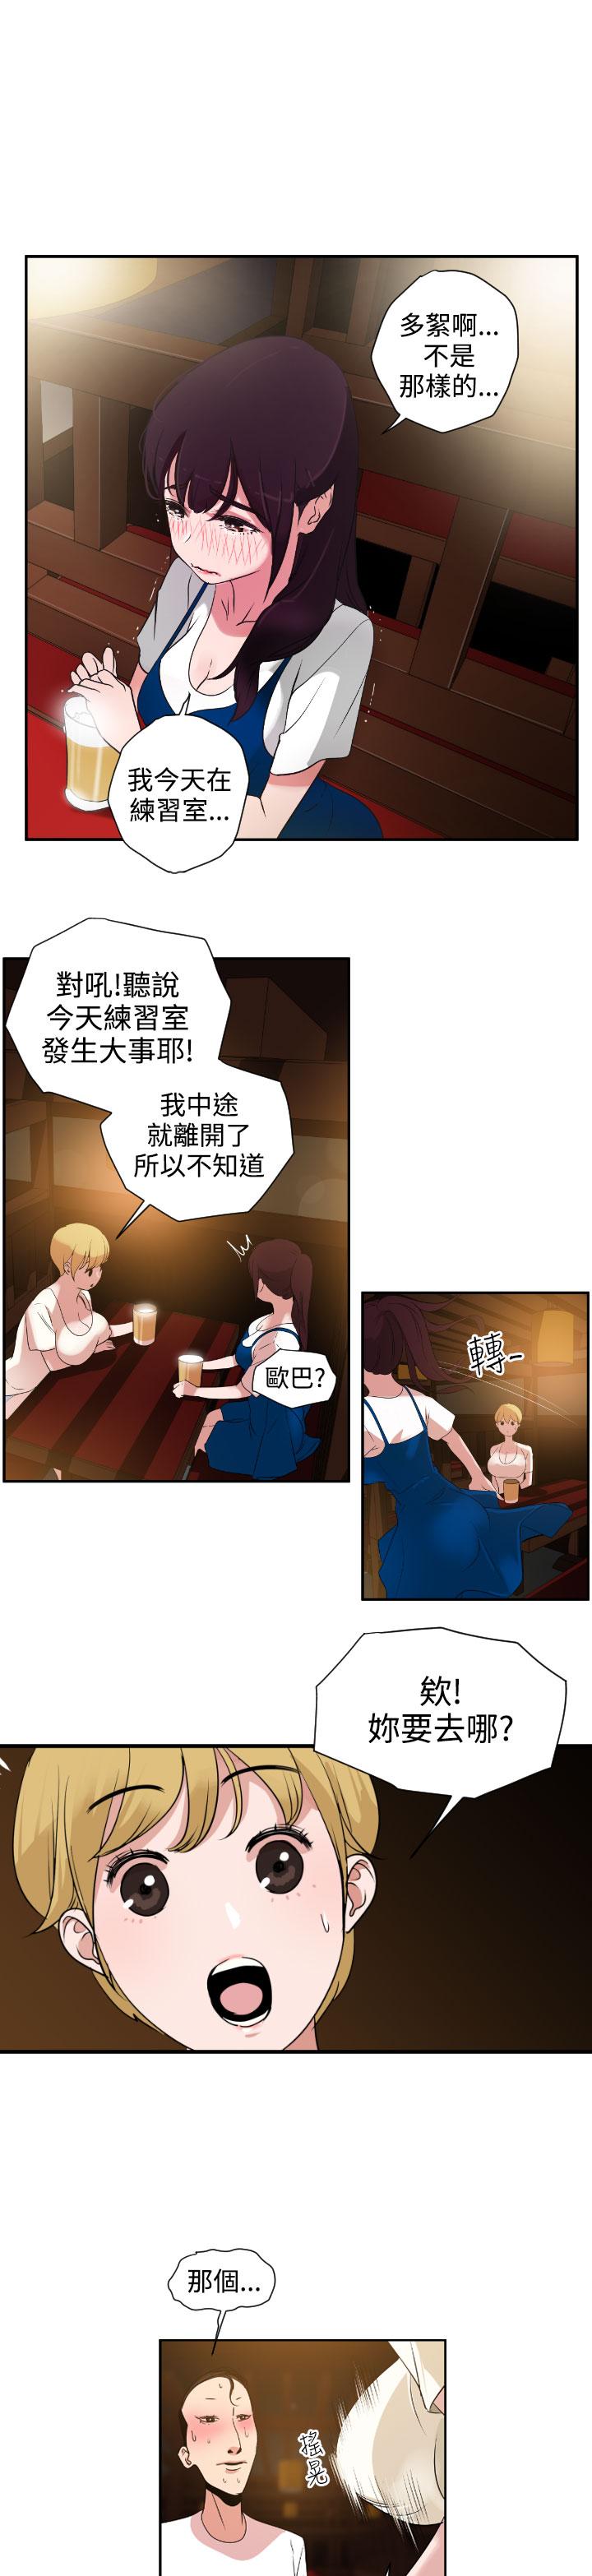 Desire King (慾求王) Ch.1-4 (chinese) 69